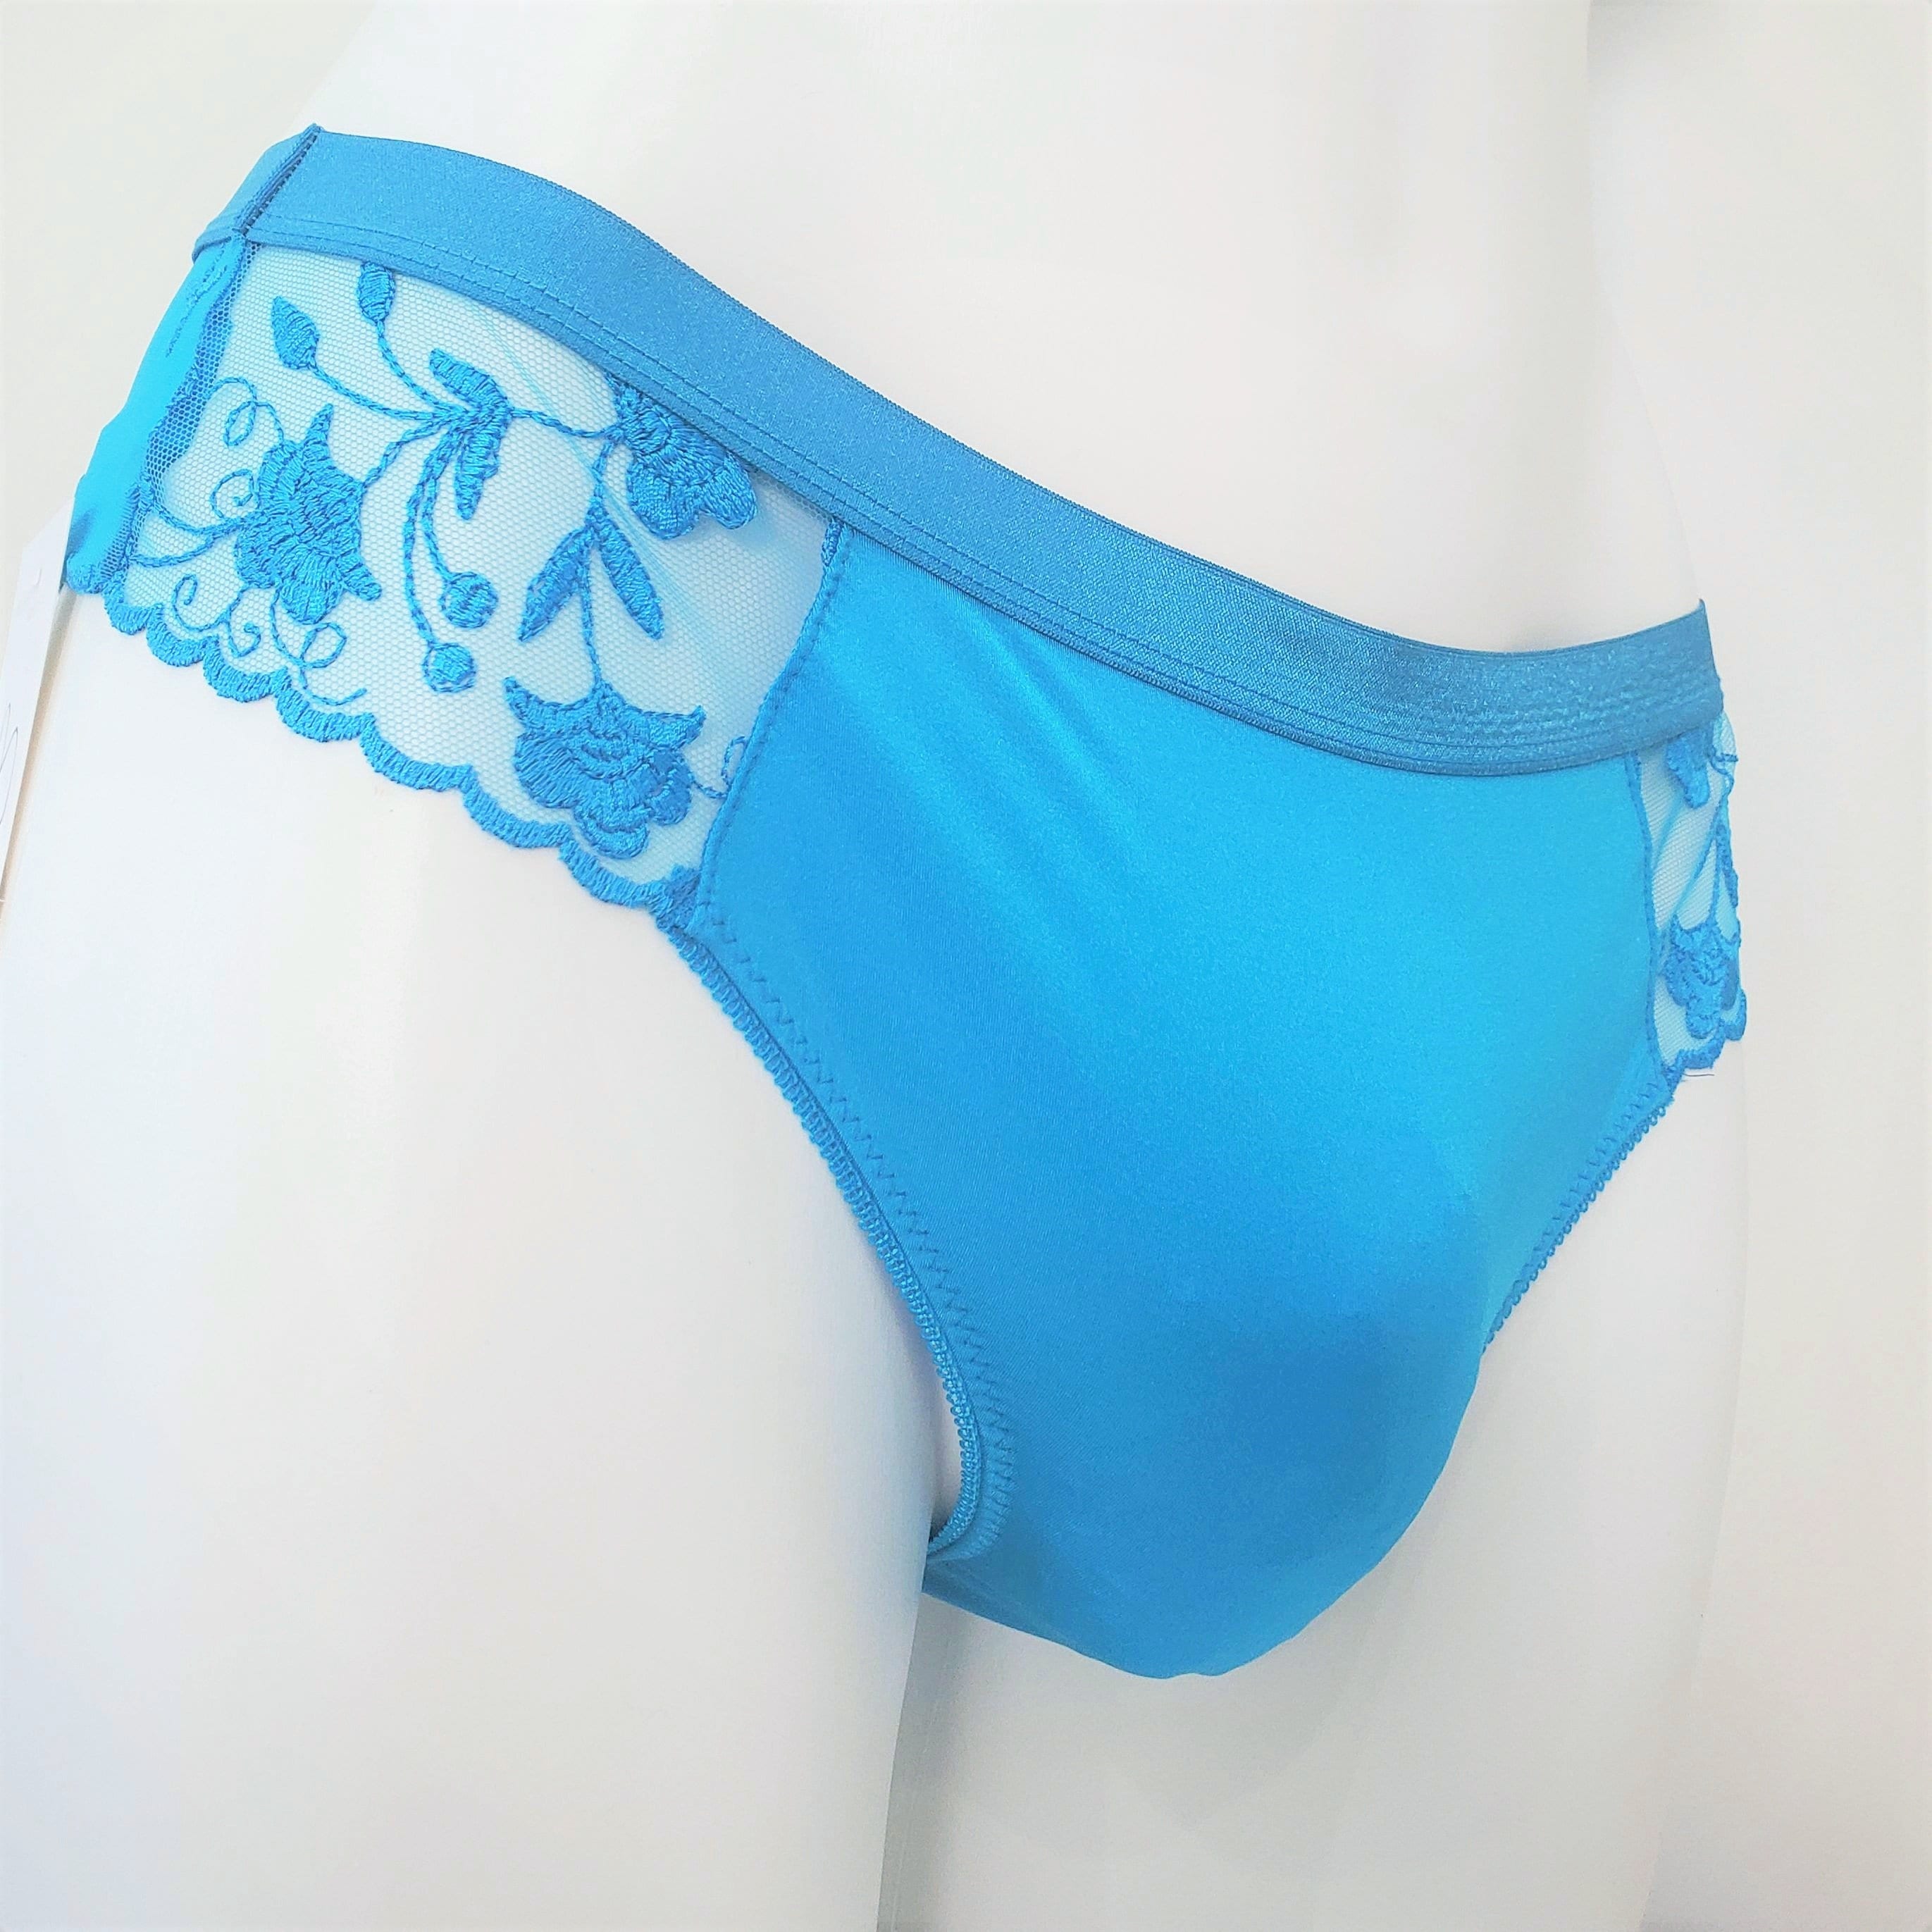 Sheer Panties, Mesh Lingerie, Blue Panties, Lace Underwear, Bridal  Lingerie, Handmade in the USA, Ready to Ship, Various Sizes, Blue 